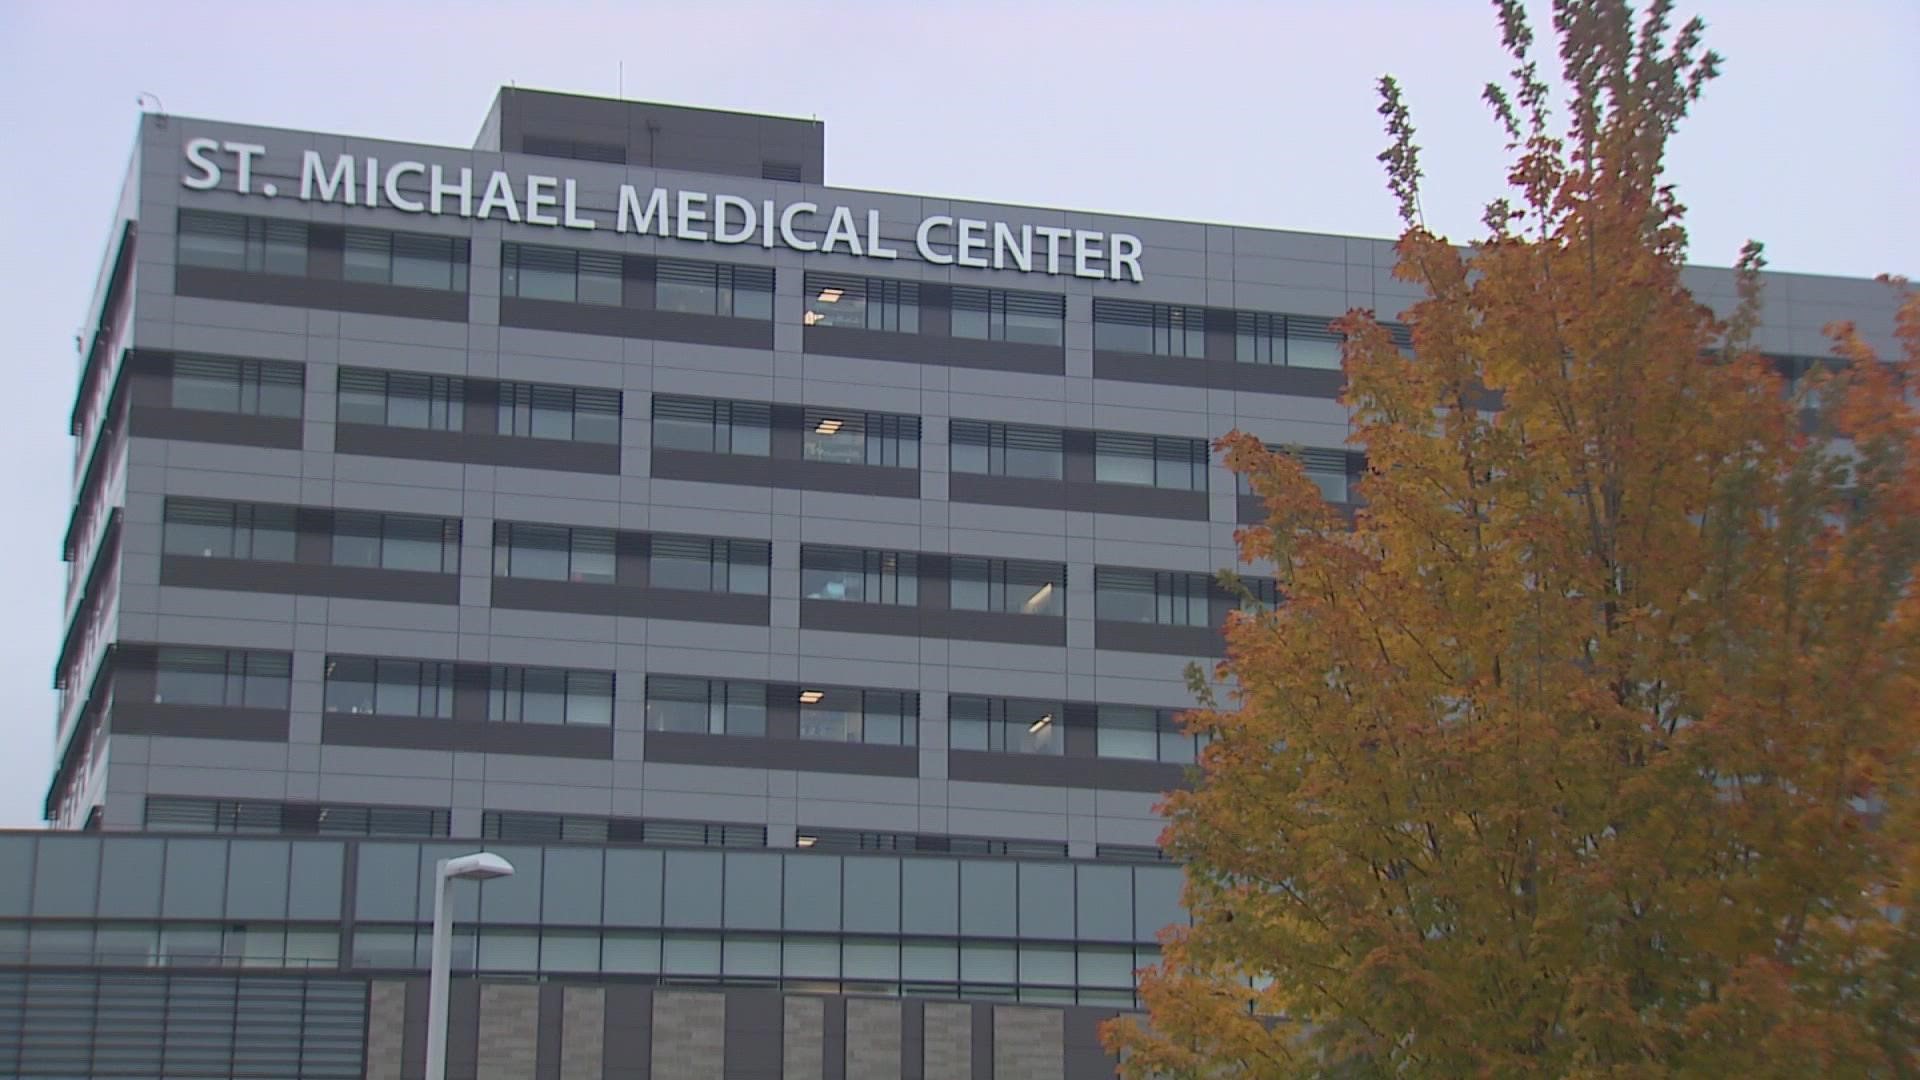 The hospital came under scrutiny after it was reported an ER nurse called 911 for help with patients in October amid staffing issues.